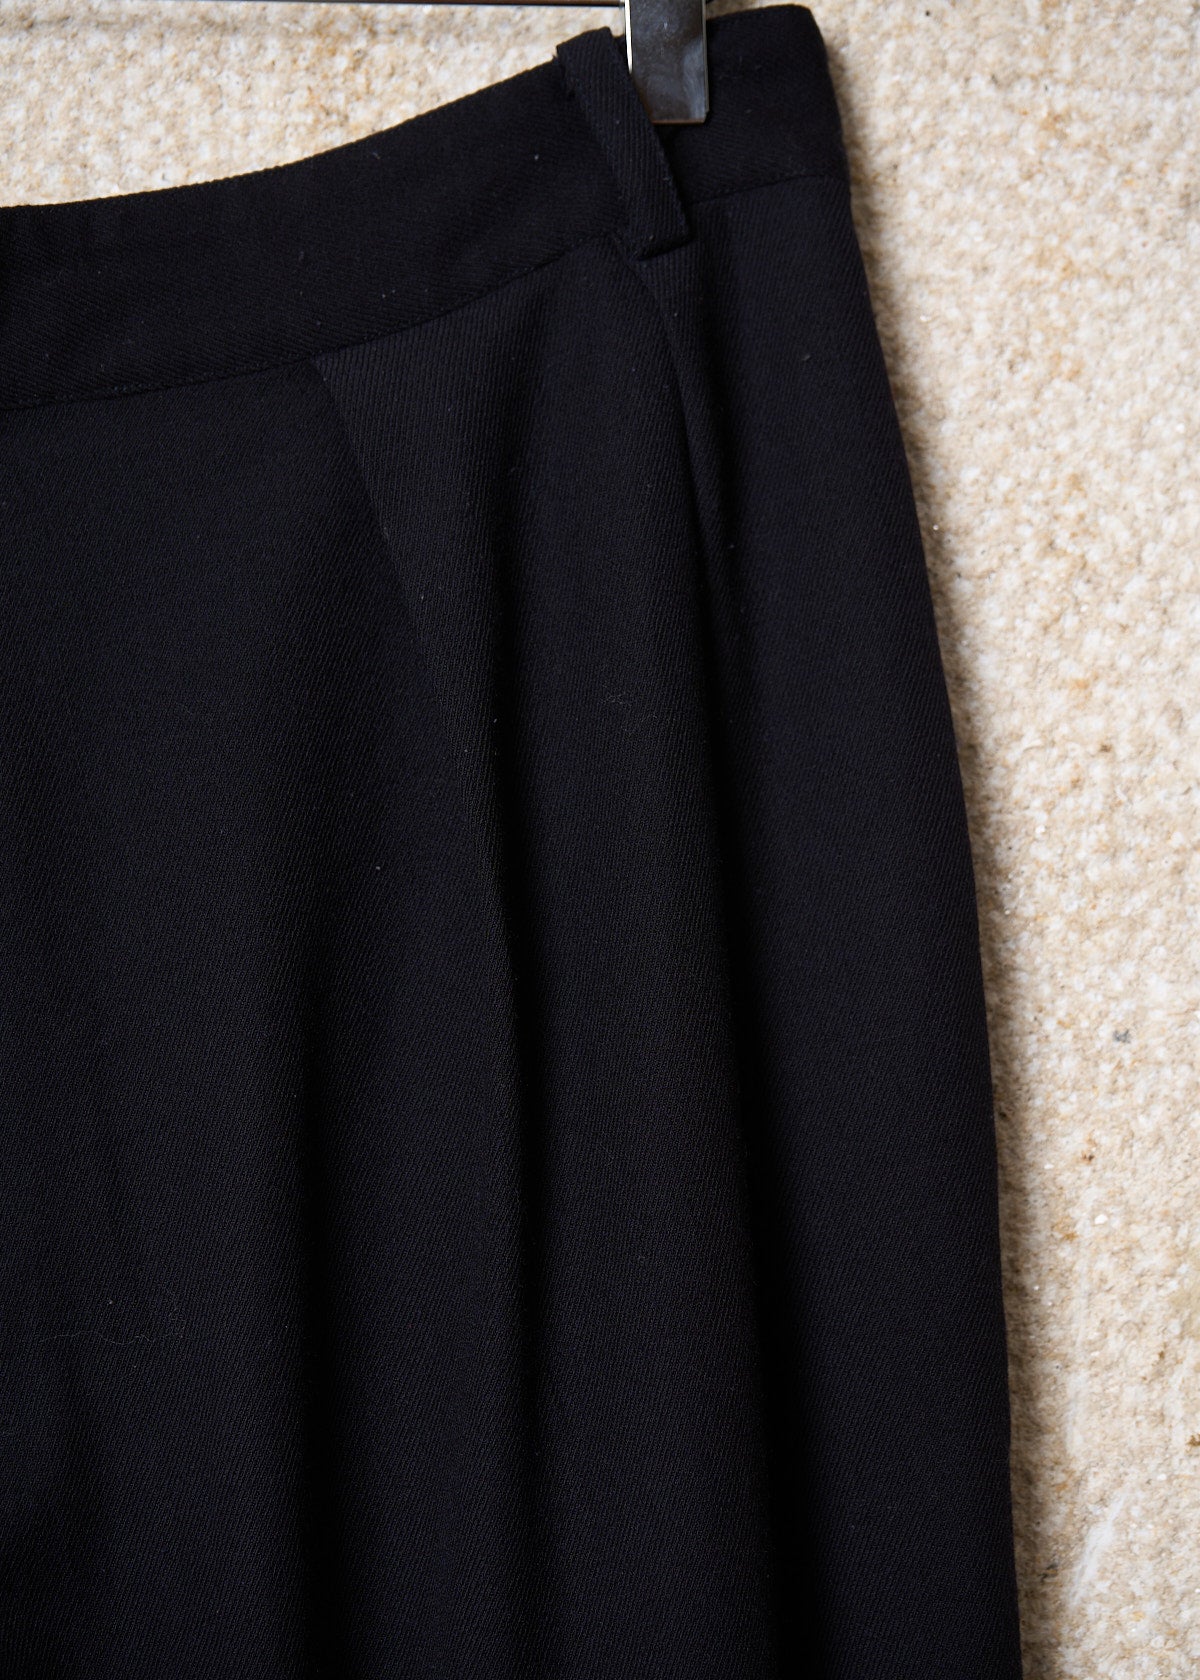 Black Wool Relax Pants 1980's - X-Large